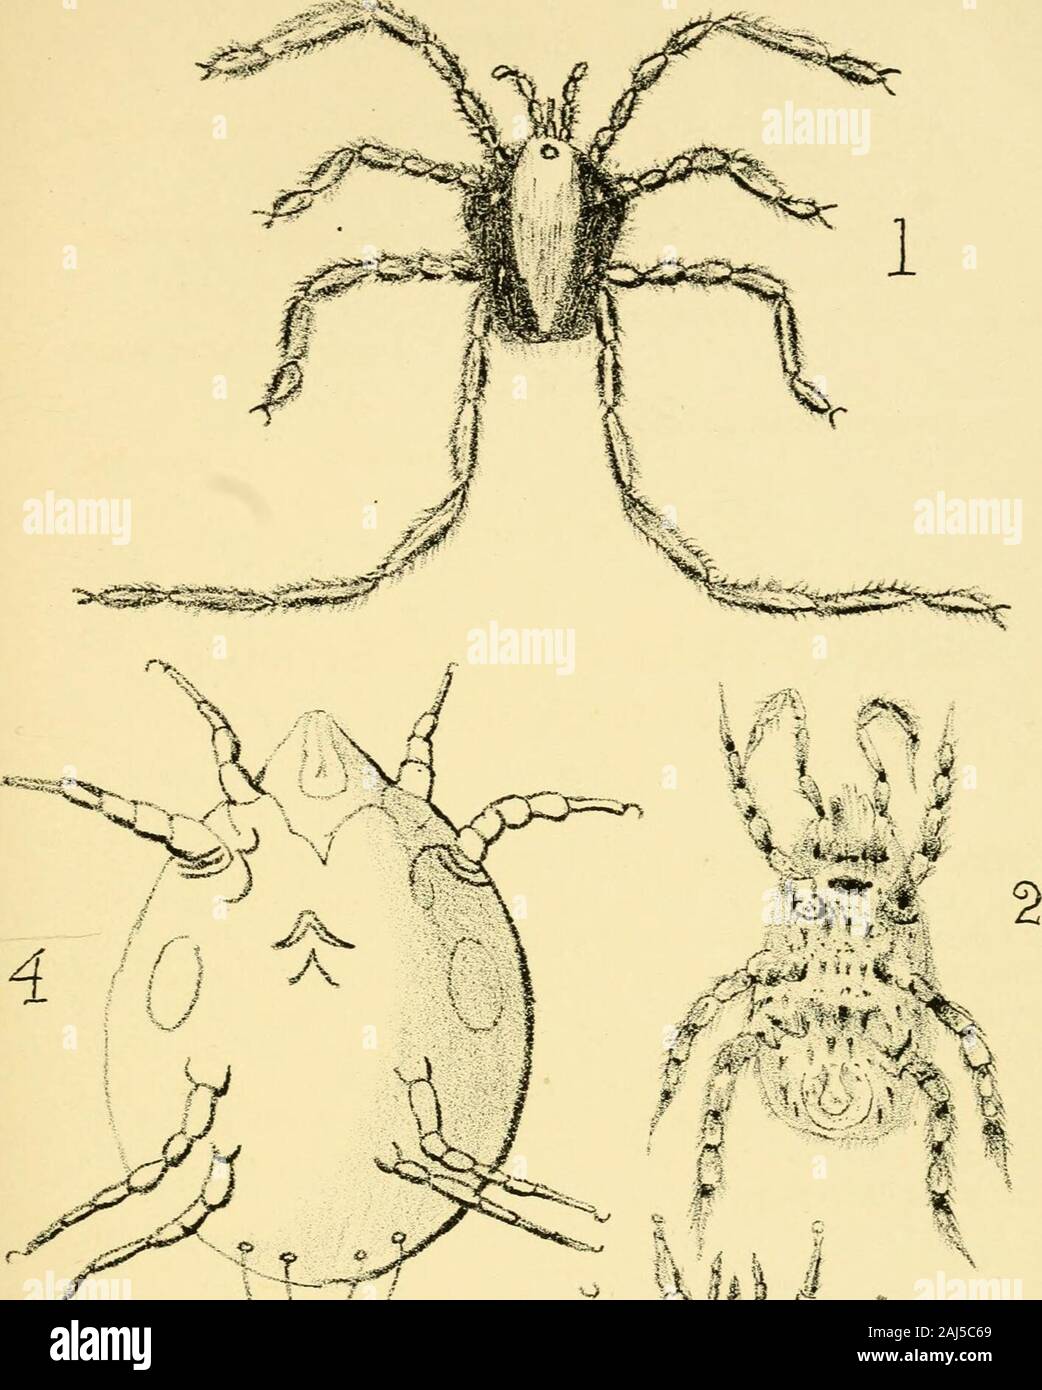 The Journal of microscopy and natural science . em under the name of Rhyiicolophus.Most of these mites are very beautiful when alive, and some ofthem are rather large. C. F. George. White Mites (PL VIII., Fig. 4).—In June, 1877, I noticed ablack poplar tree suffering from the ravages of insects. In manyplaces it was bored by the larvae of the Goat-moth {Cossus lig?ii-perdci). On removing a portion of the bark, which was wet andloose, I found it covered with a moving mass consisting of myriadsof very peculiar White Mites. When I examined them under amicroscope, I found them to differ from any m Stock Photo